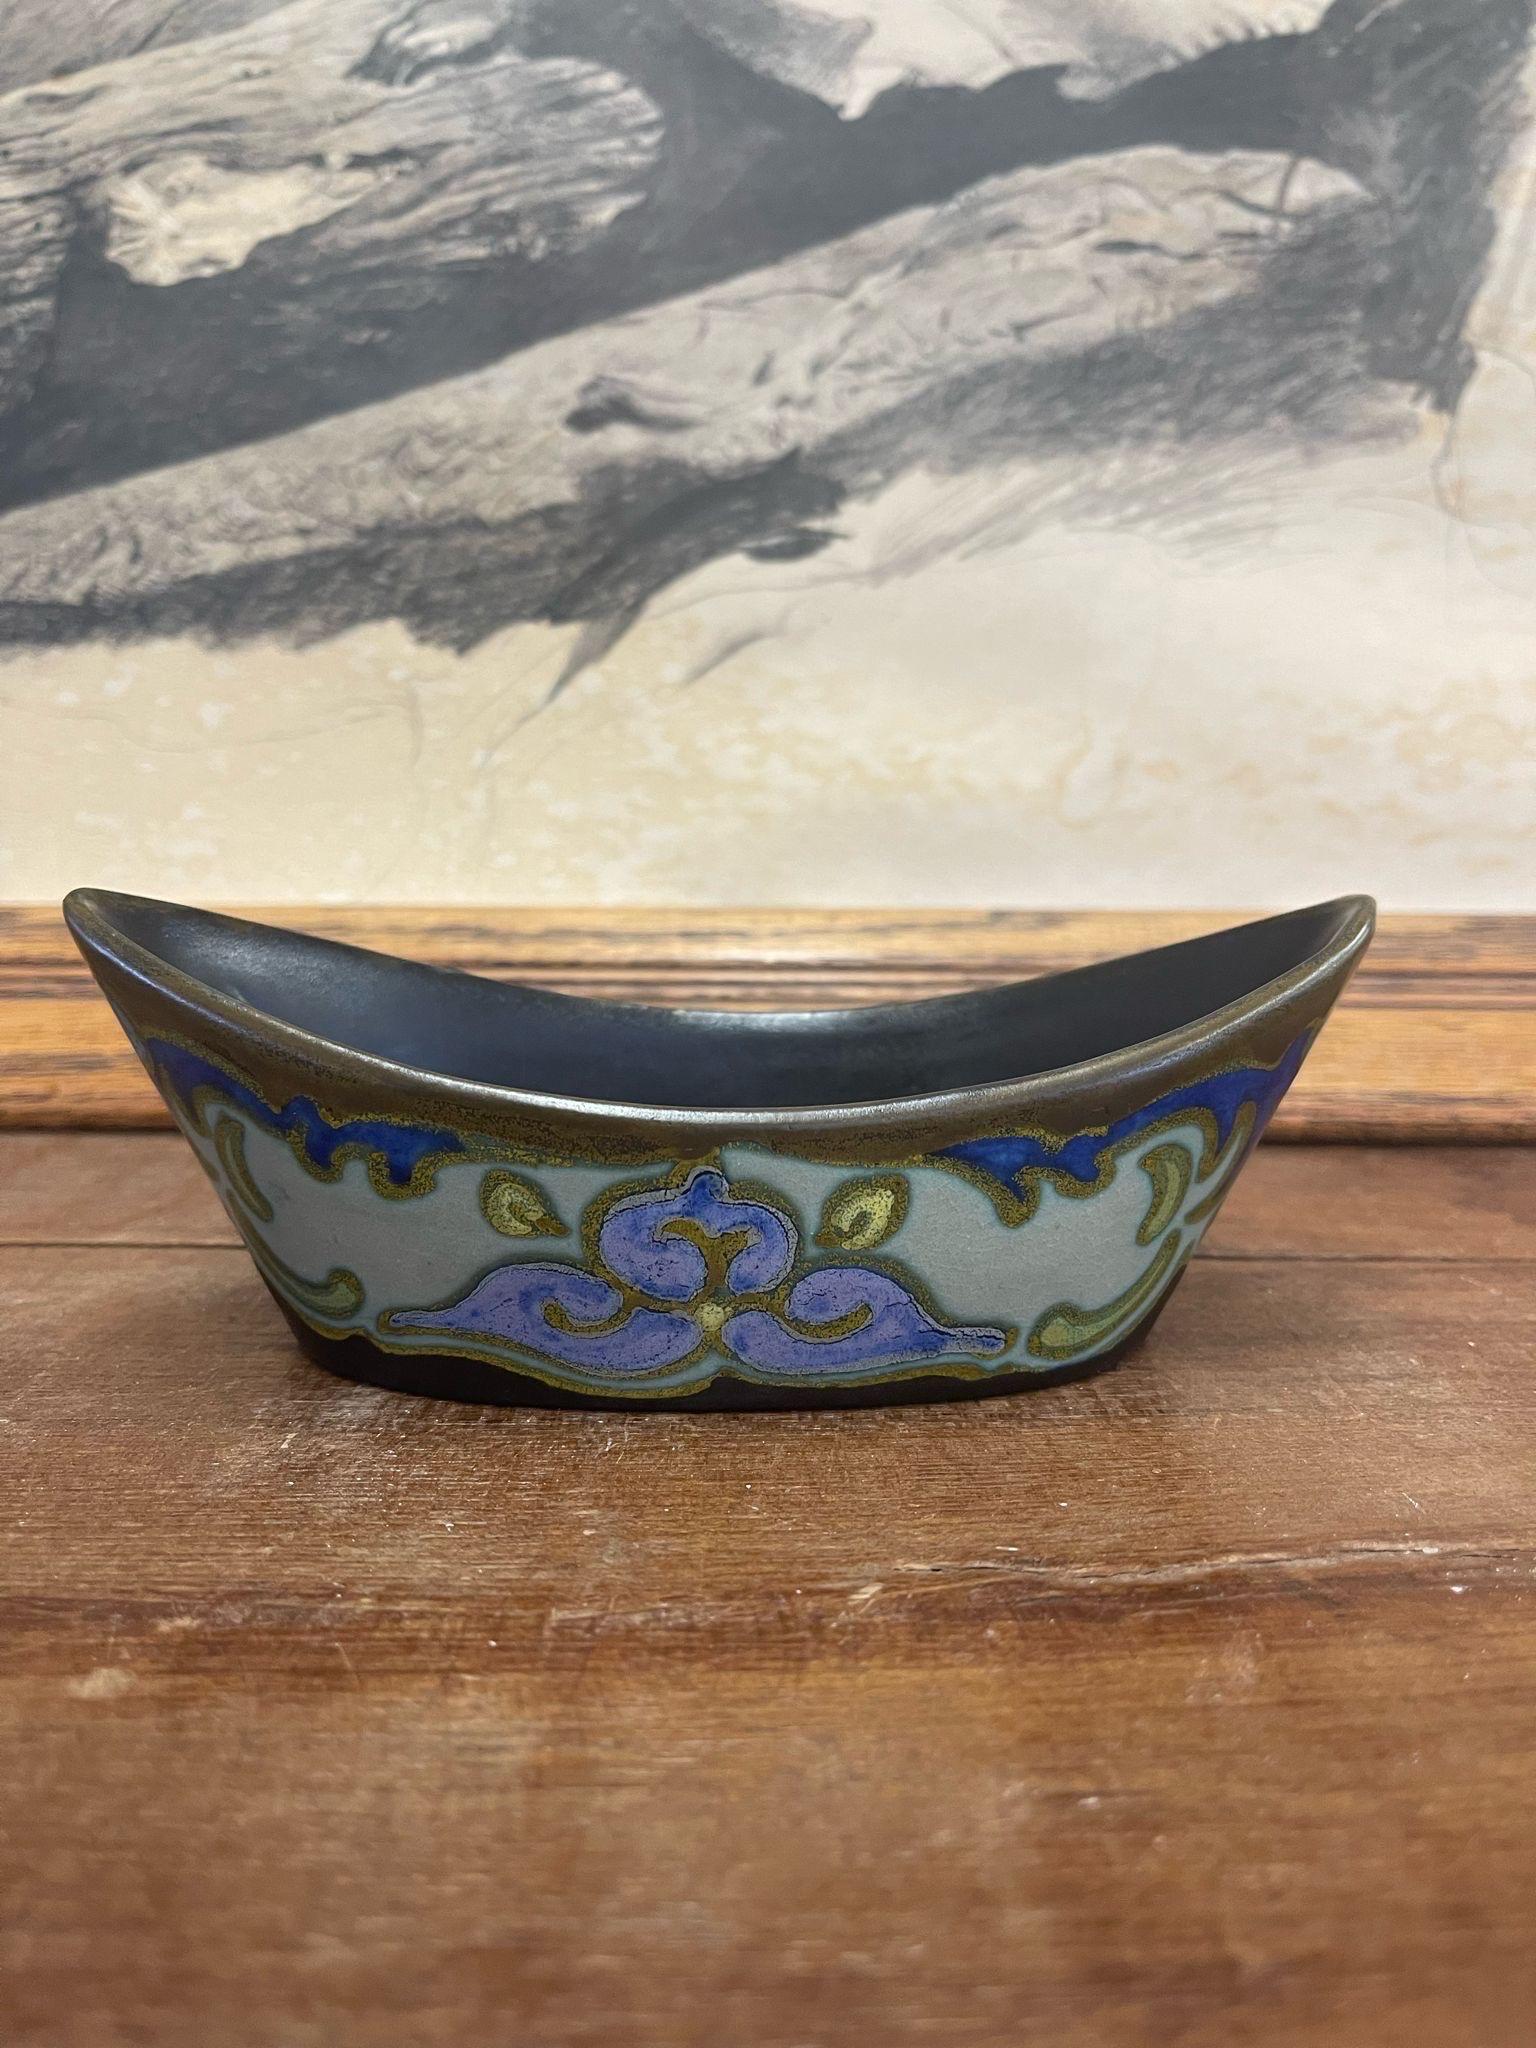 Makers Mark on the Bottom as Pictured. Blue and Green Colored Glaze on the Dish. Vintage Condition Consistent with Age as Pictured.

Dimensions. 8 W ; 3 D ; 3 H